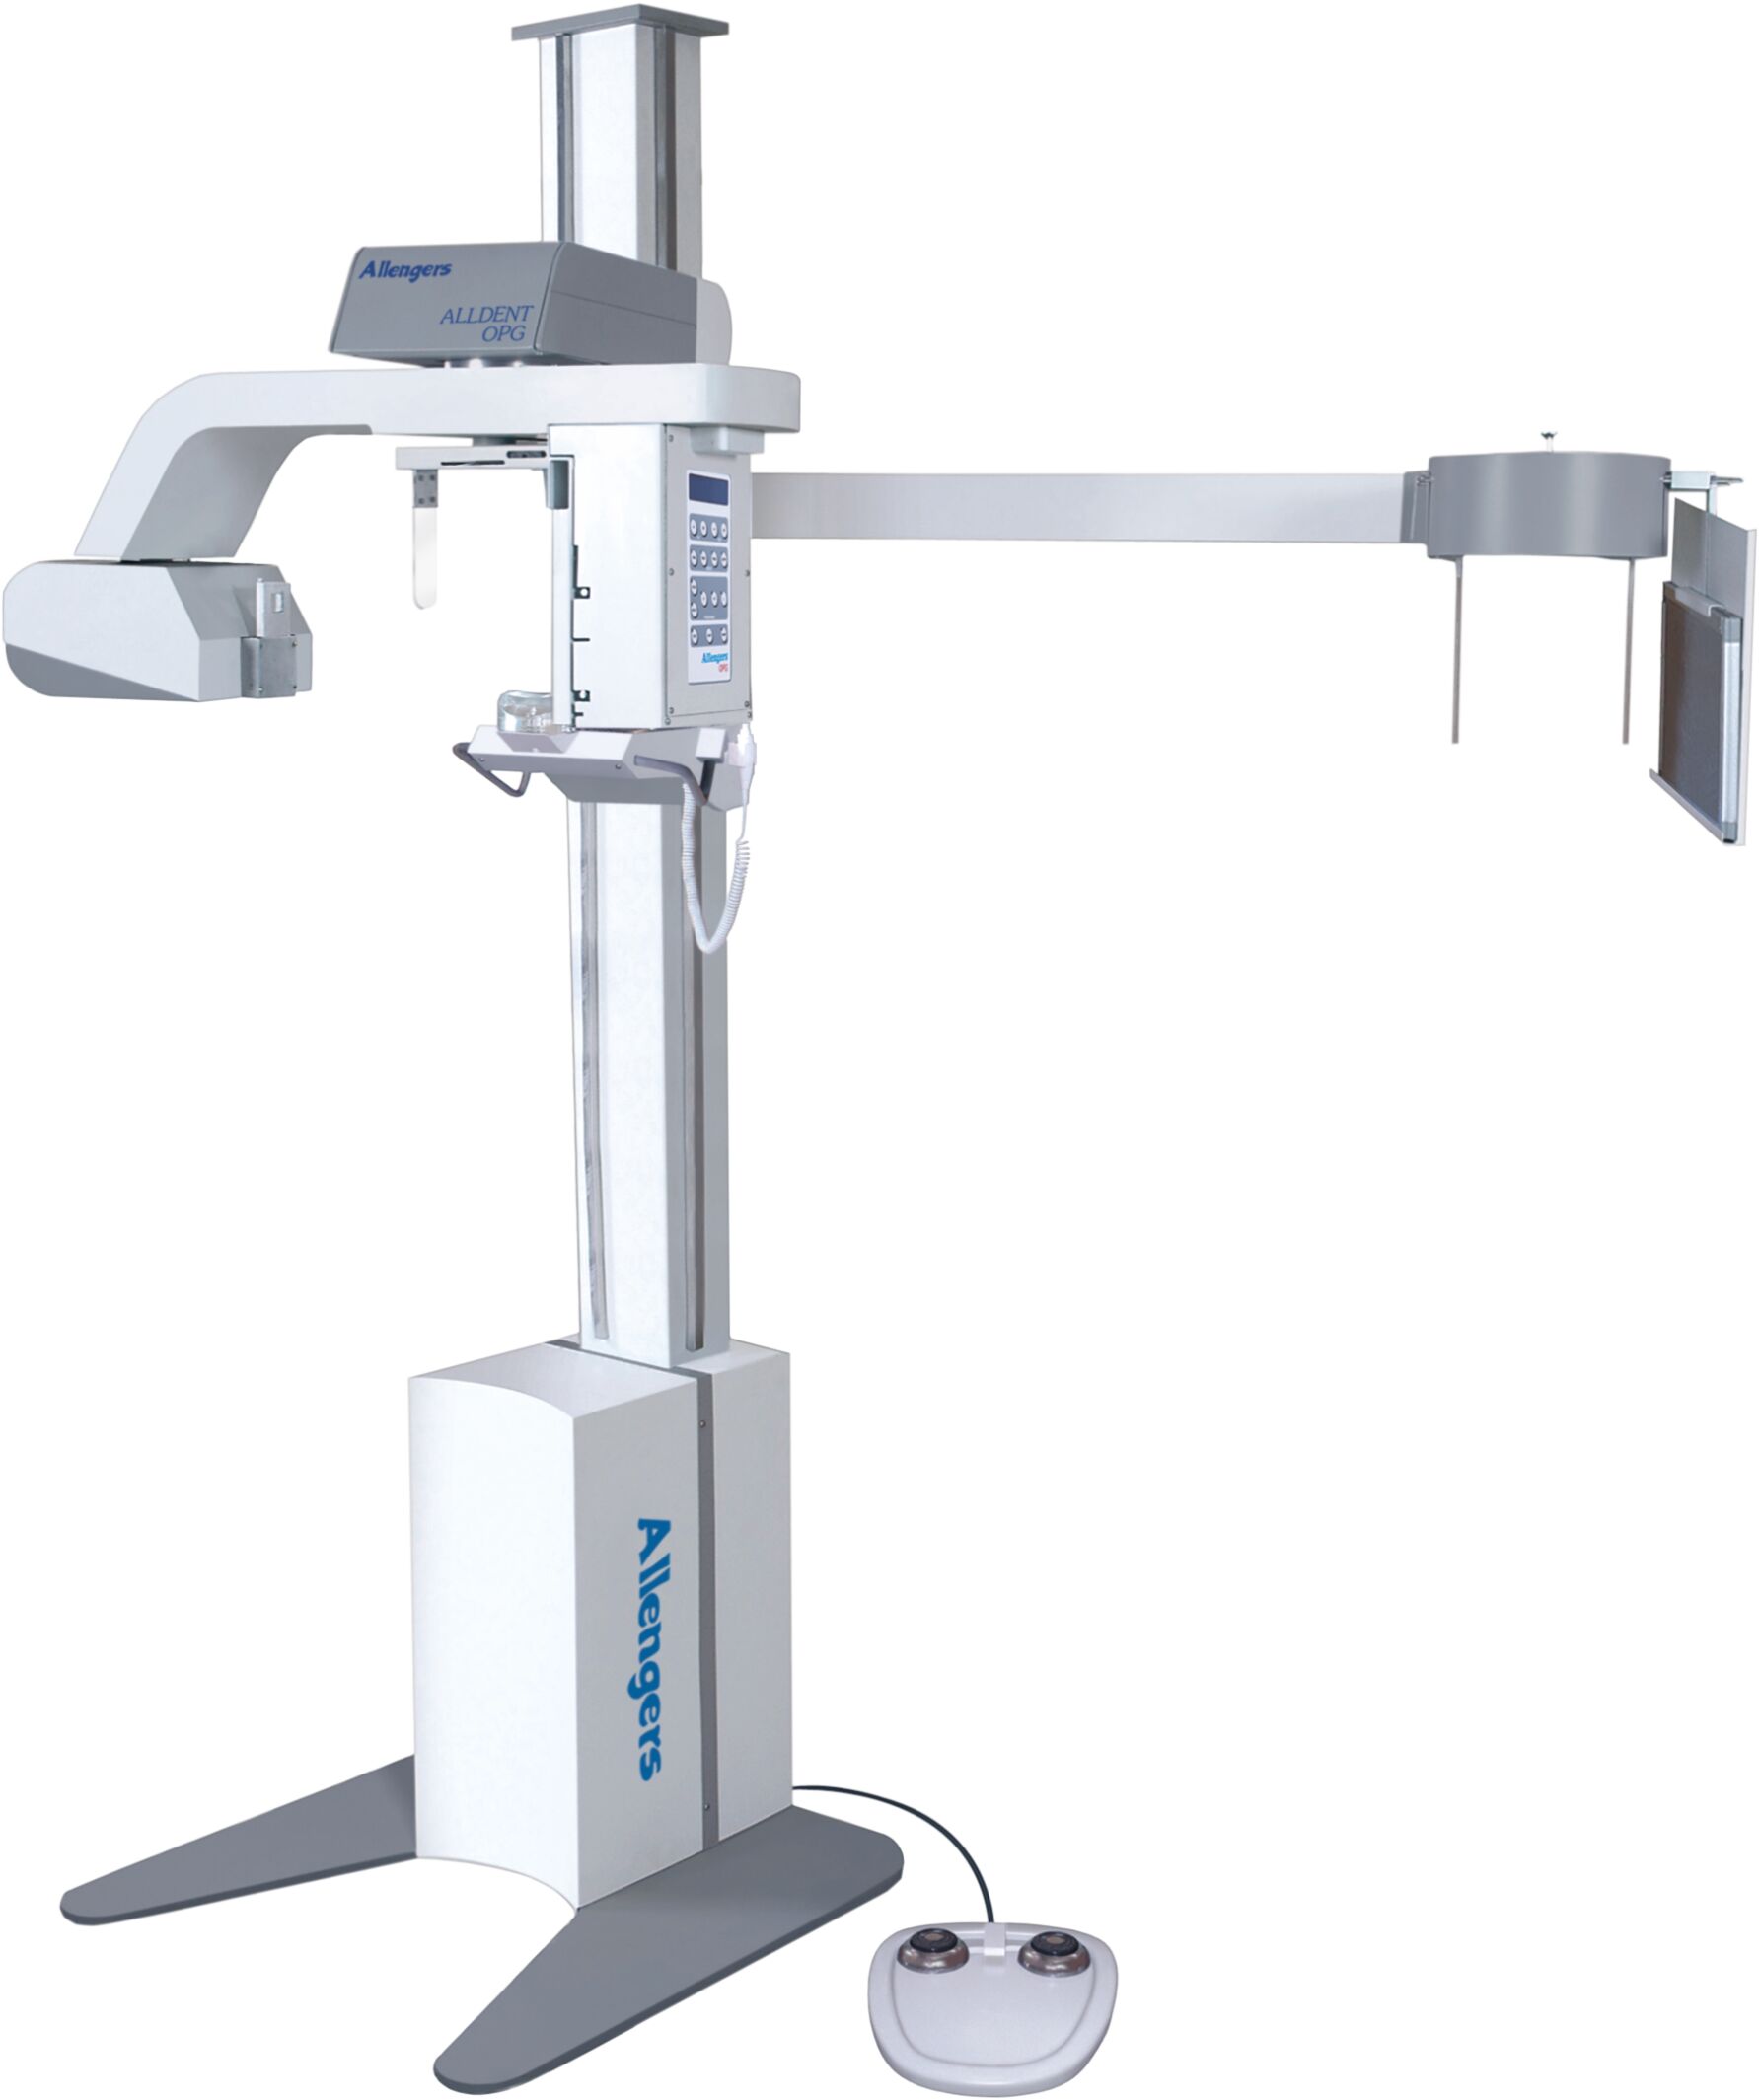 Alldent Hf Panoramic Dental X-ray System